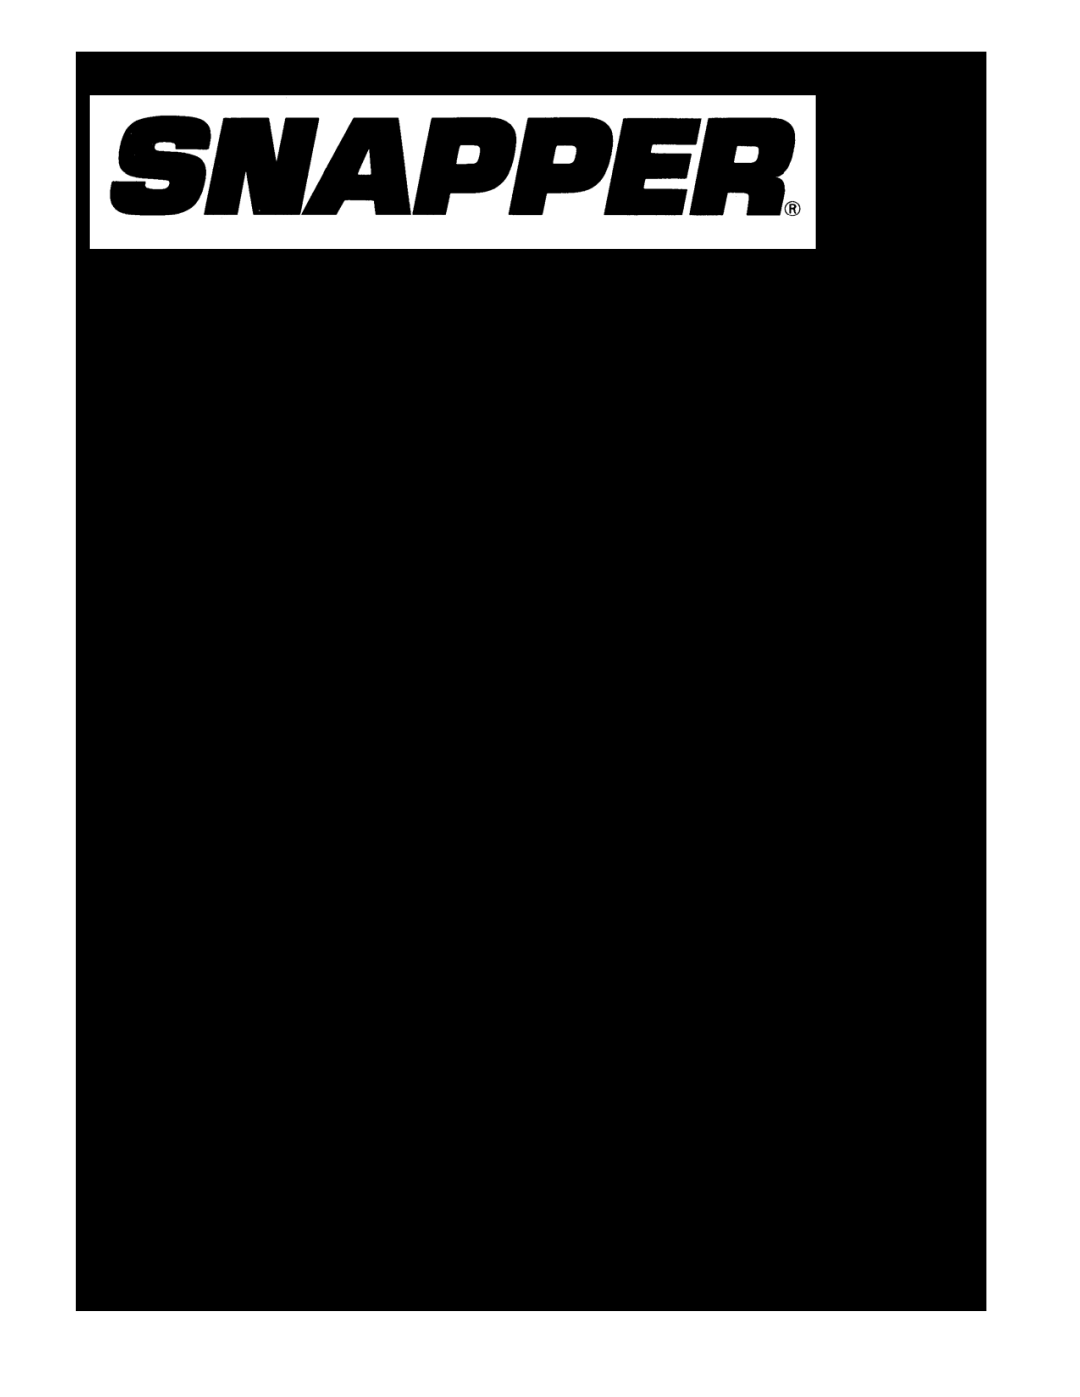 Snapper 1696000 Reproduction, 24 9TP TWO STAGE INTERMEDIATE SNOWTHROWER, Parts Manual for, Manual No, 7105282, Revision 